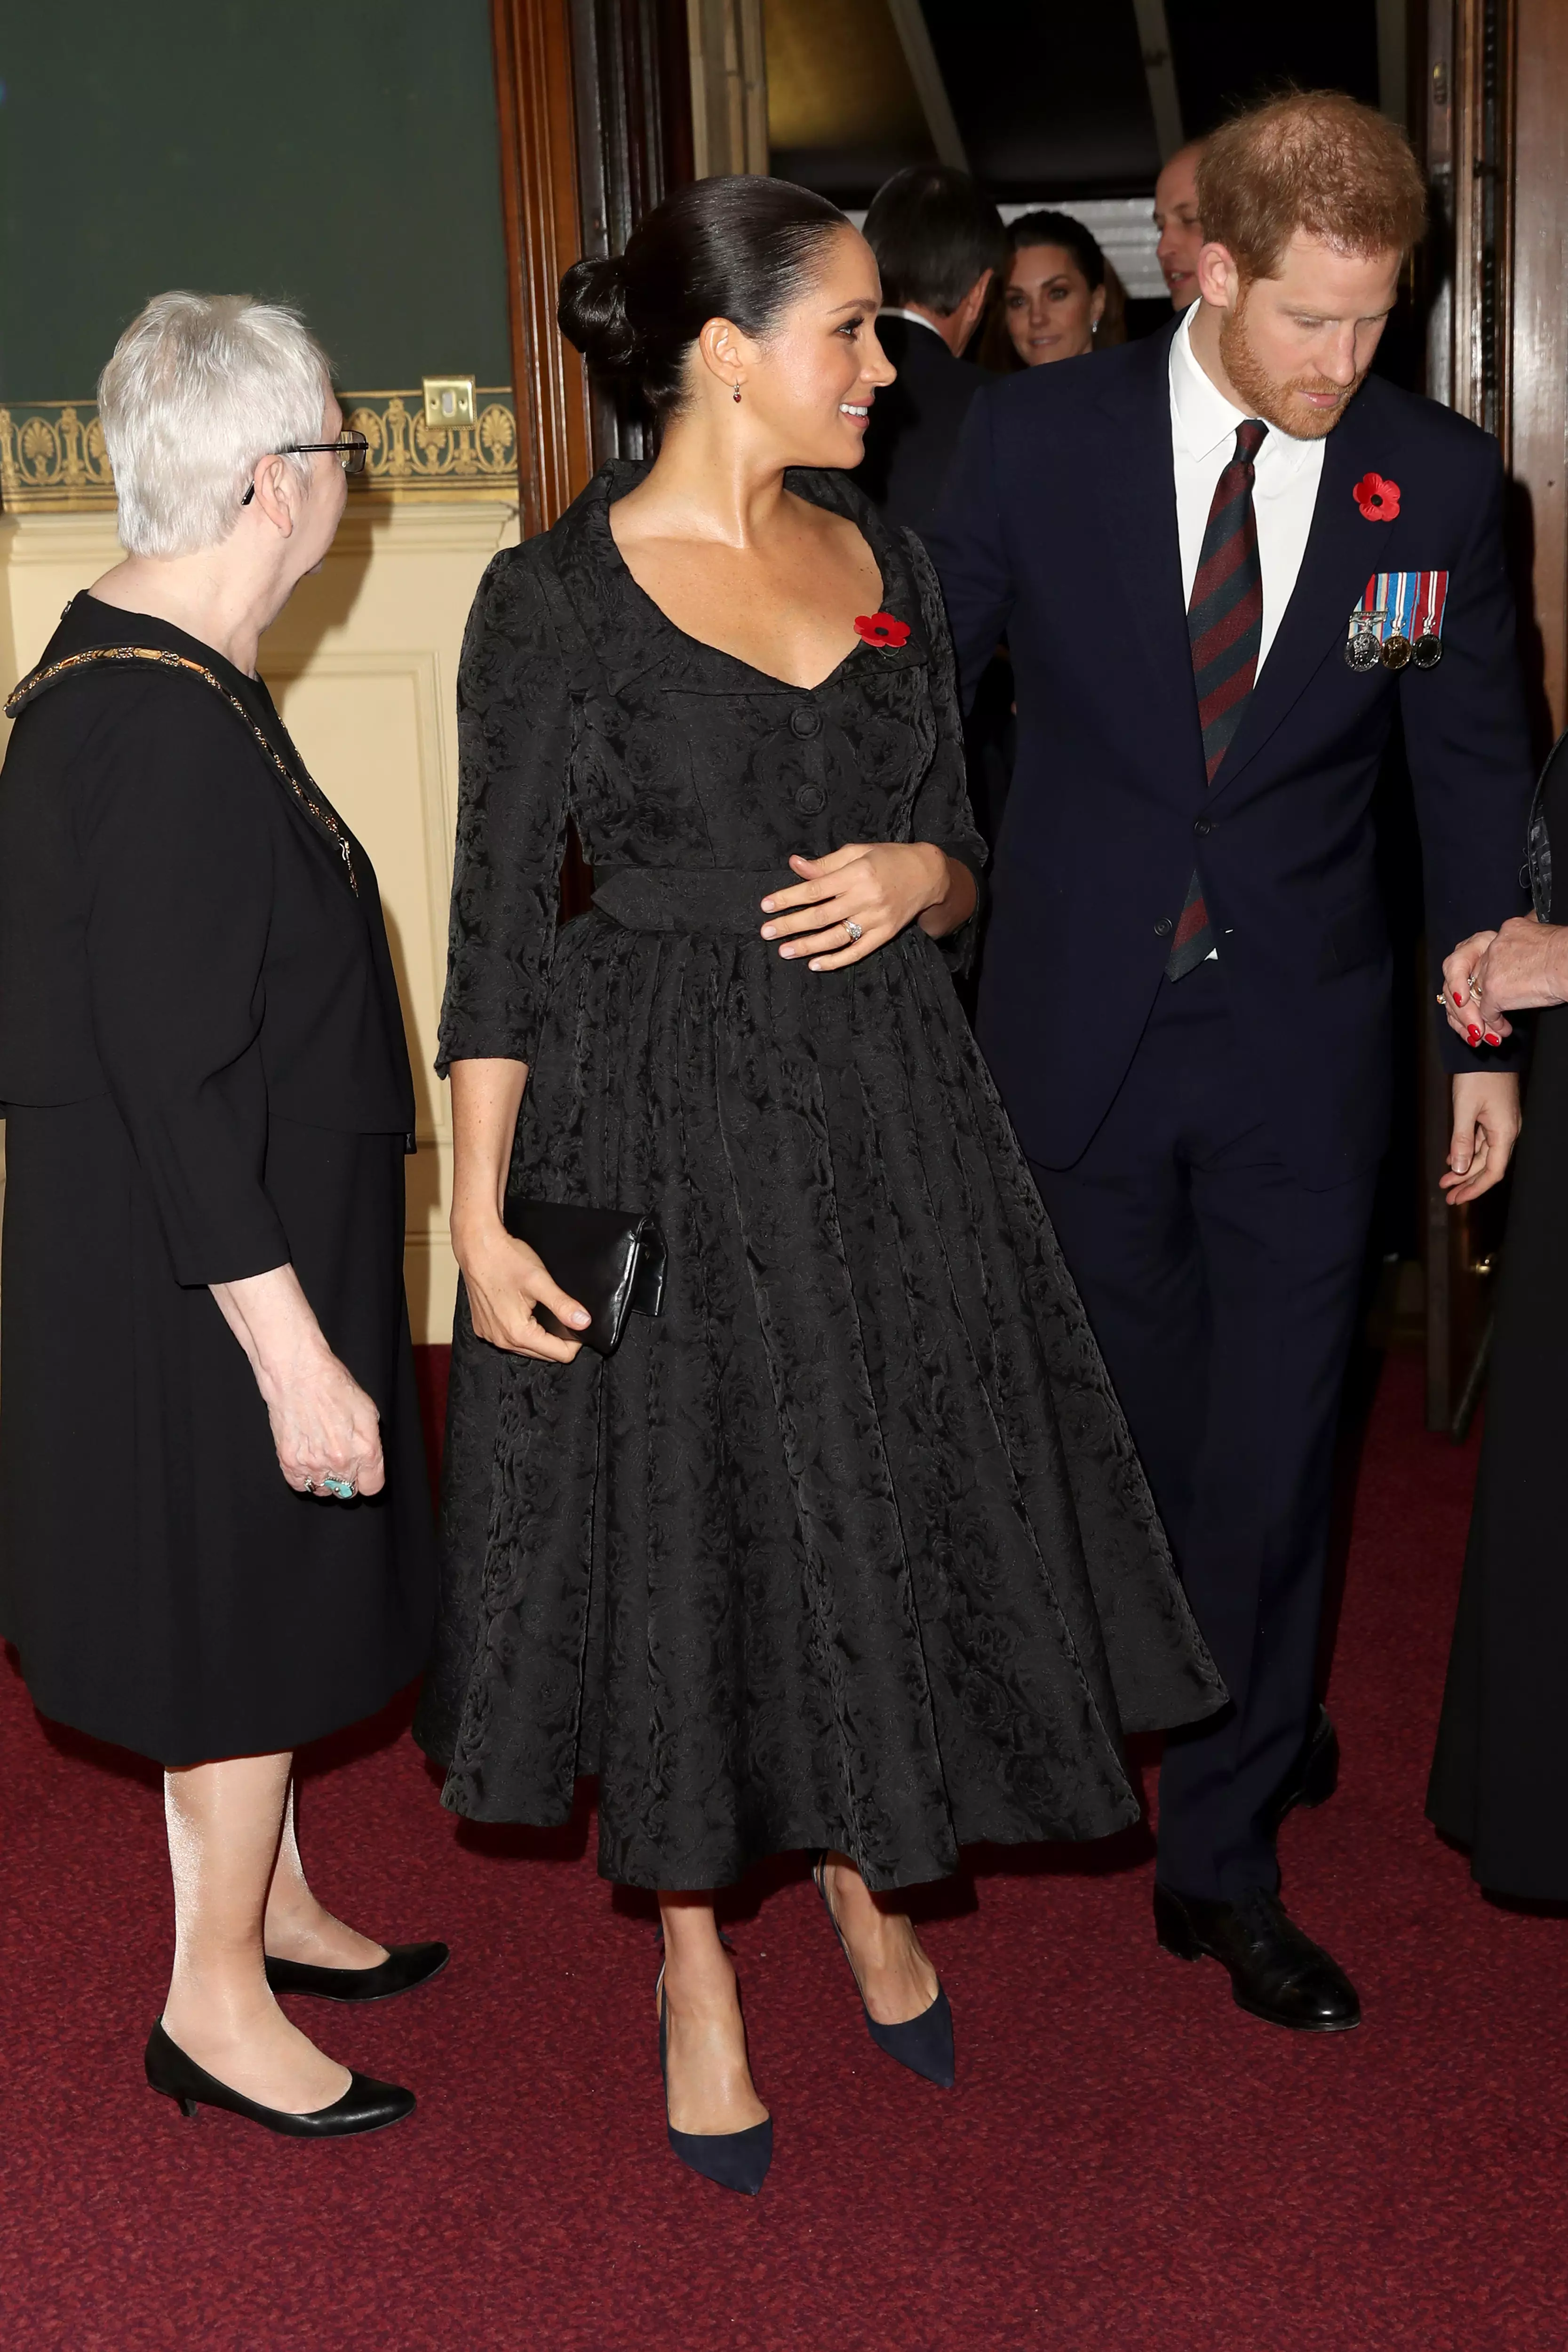 Harry and Meghan pictured in London last year (